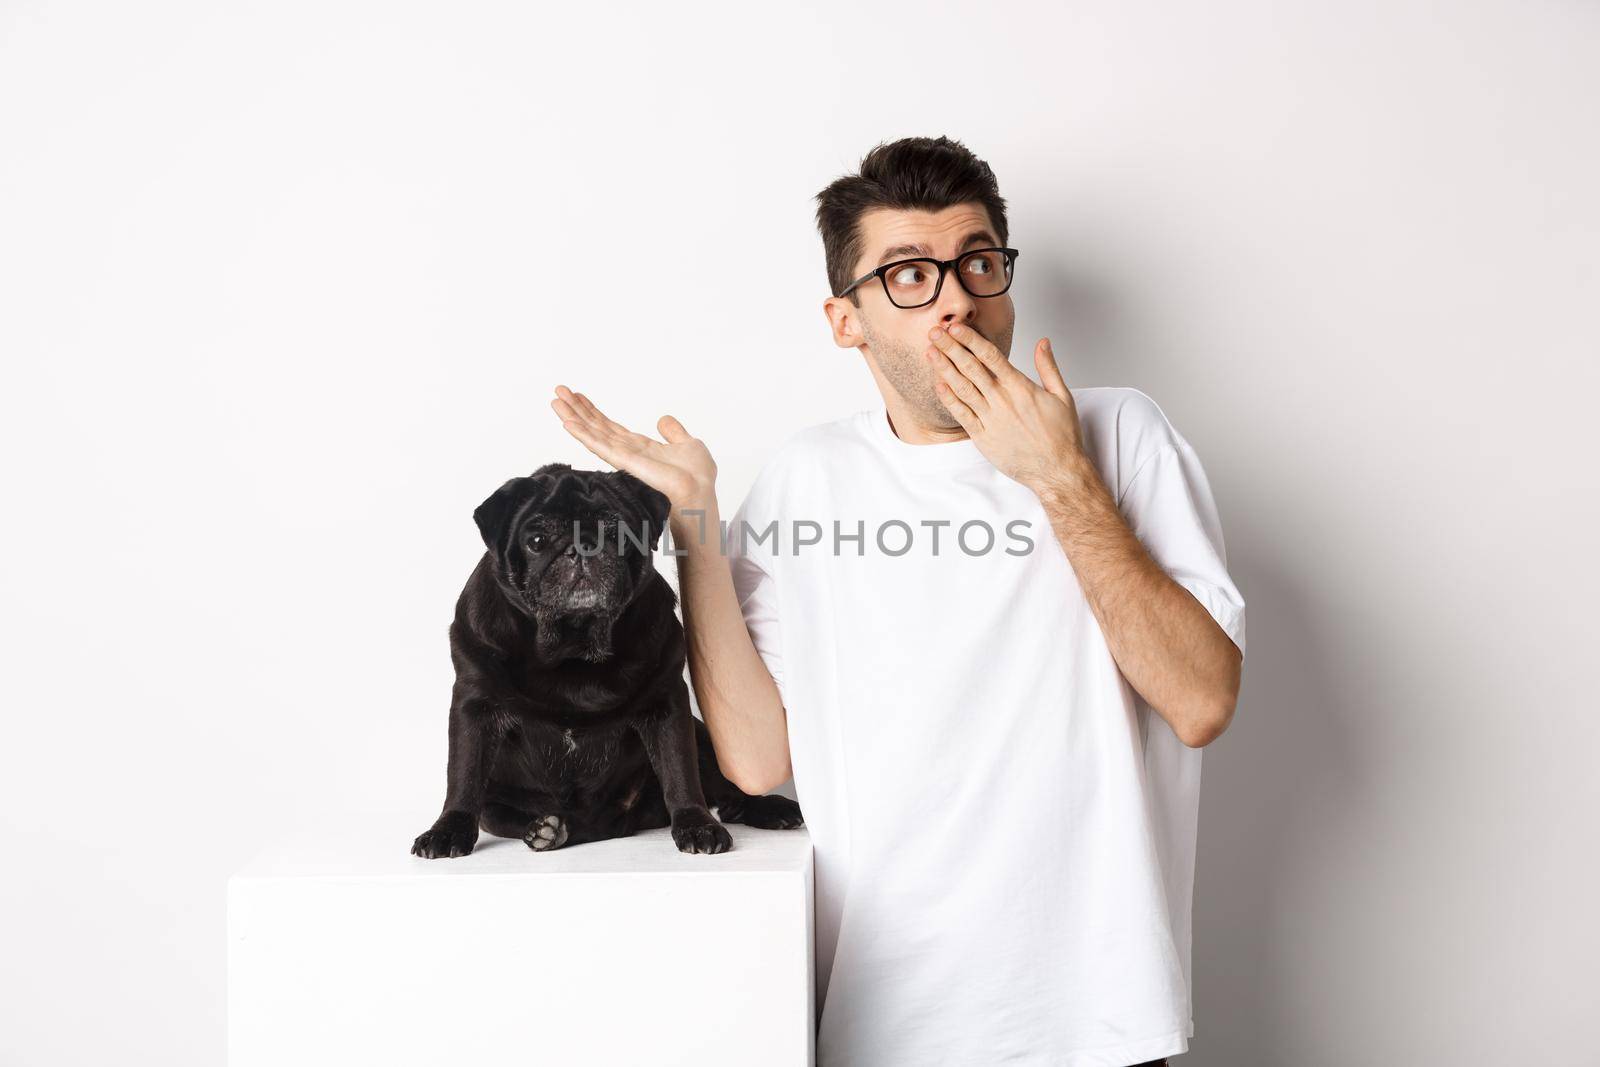 Surprised and shocked man in glasses, standing near cute black dog and staring right at logo, posing over white background.